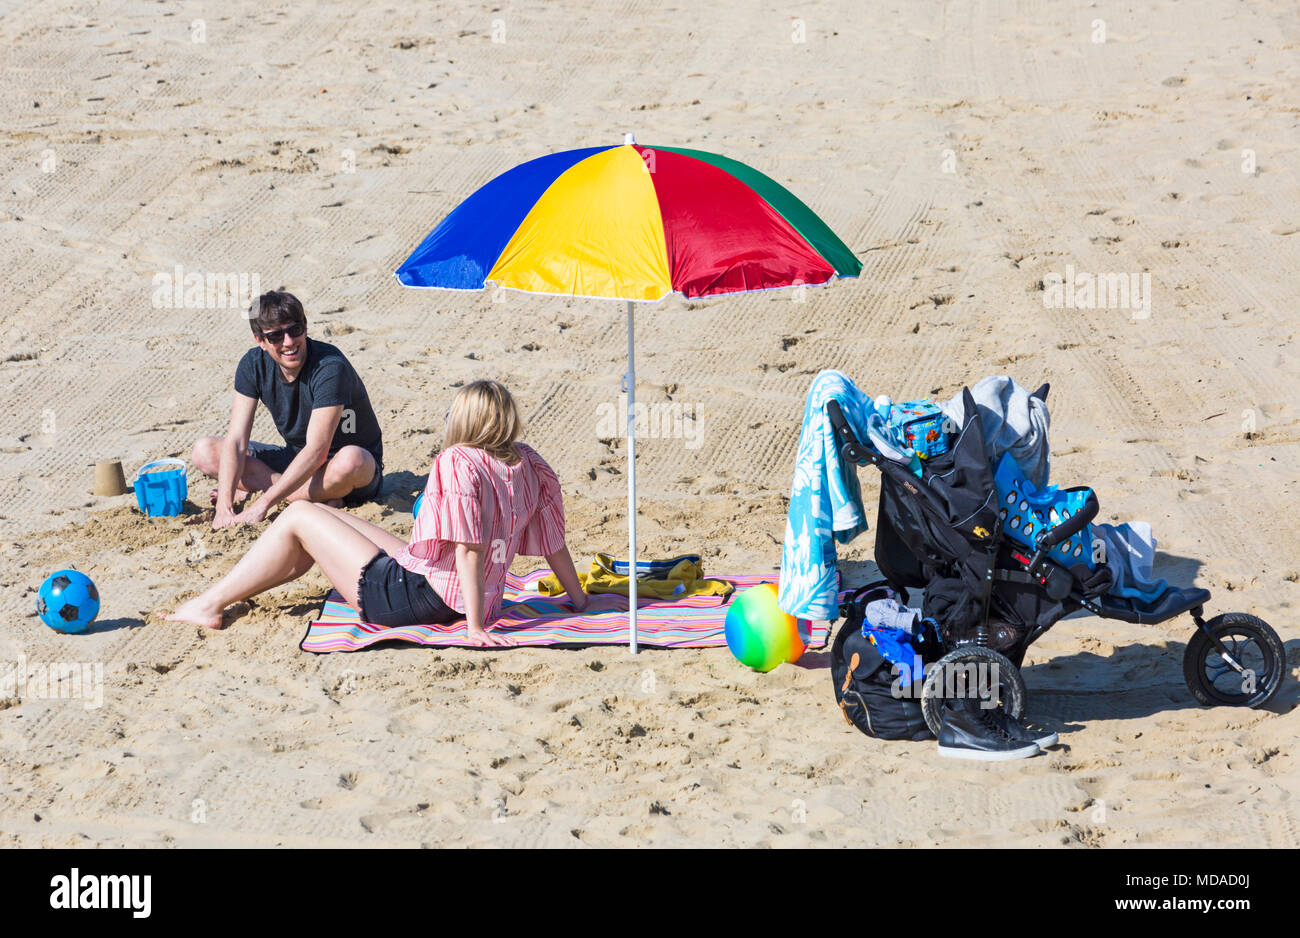 Bournemouth, Dorset, UK. 19th April 2018. UK weather: lovely warm sunny day at Bournemouth beaches with clear blue skies and unbroken sunshine, as visitors head to the seaside to enjoy the warmest day of the year so far. Couple relaxing on the beach under colourful parasol with pushchair buggy by the side. Credit: Carolyn Jenkins/Alamy Live News Stock Photo